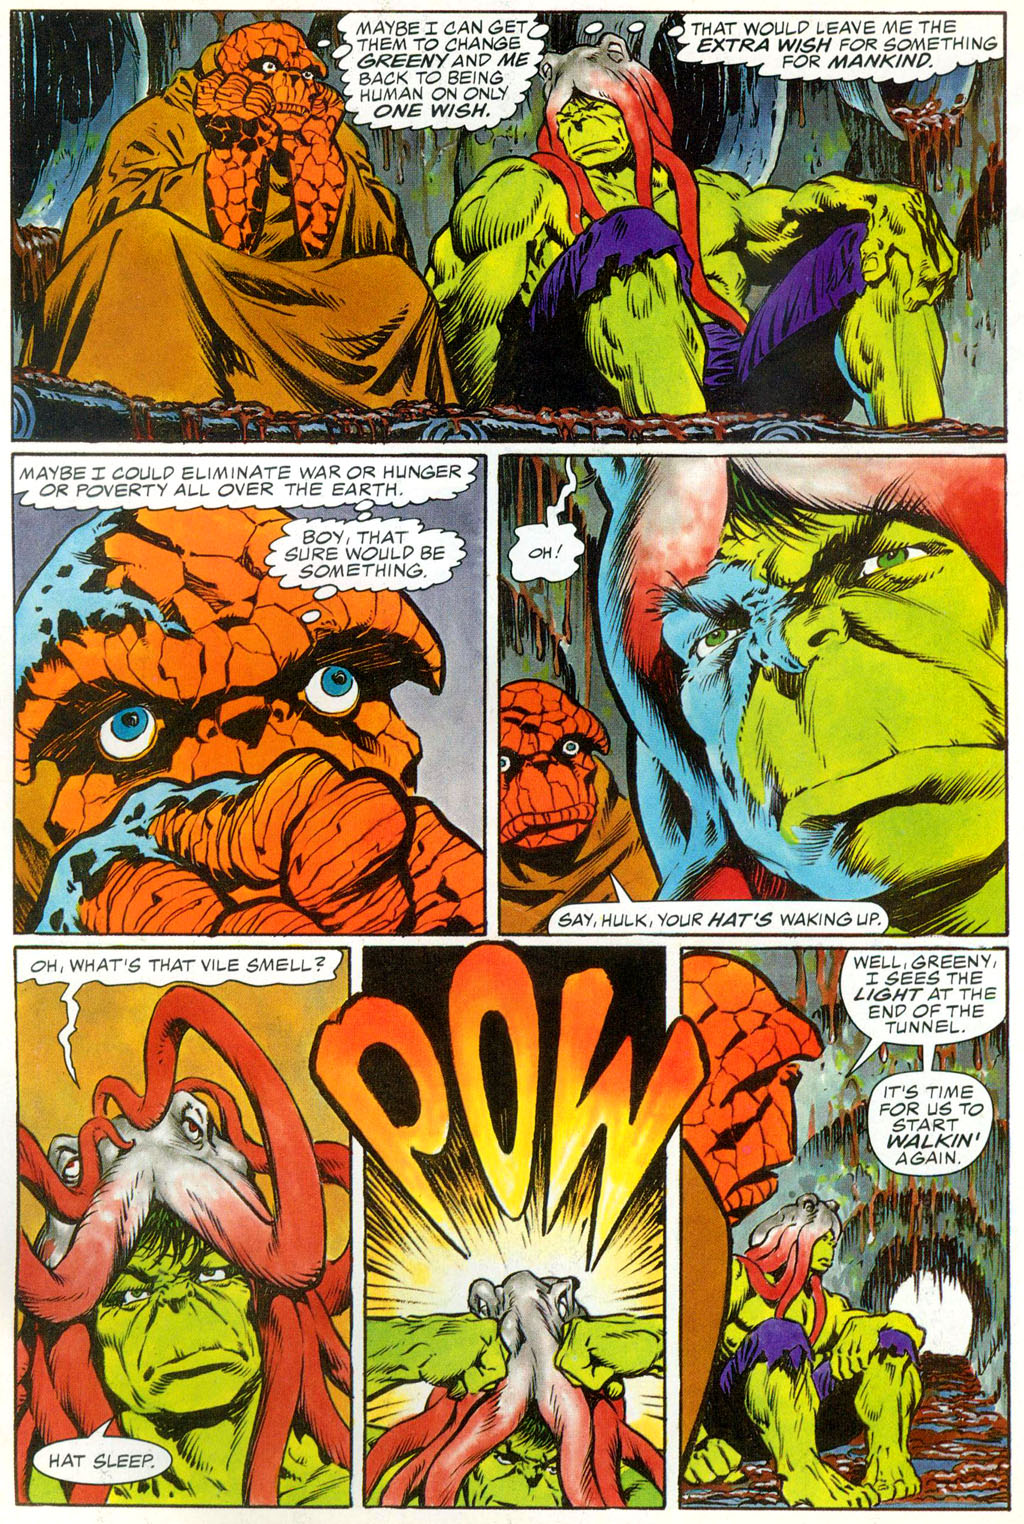 Read online Marvel Graphic Novel comic -  Issue #29 - Hulk & Thing - The Big Change - 30